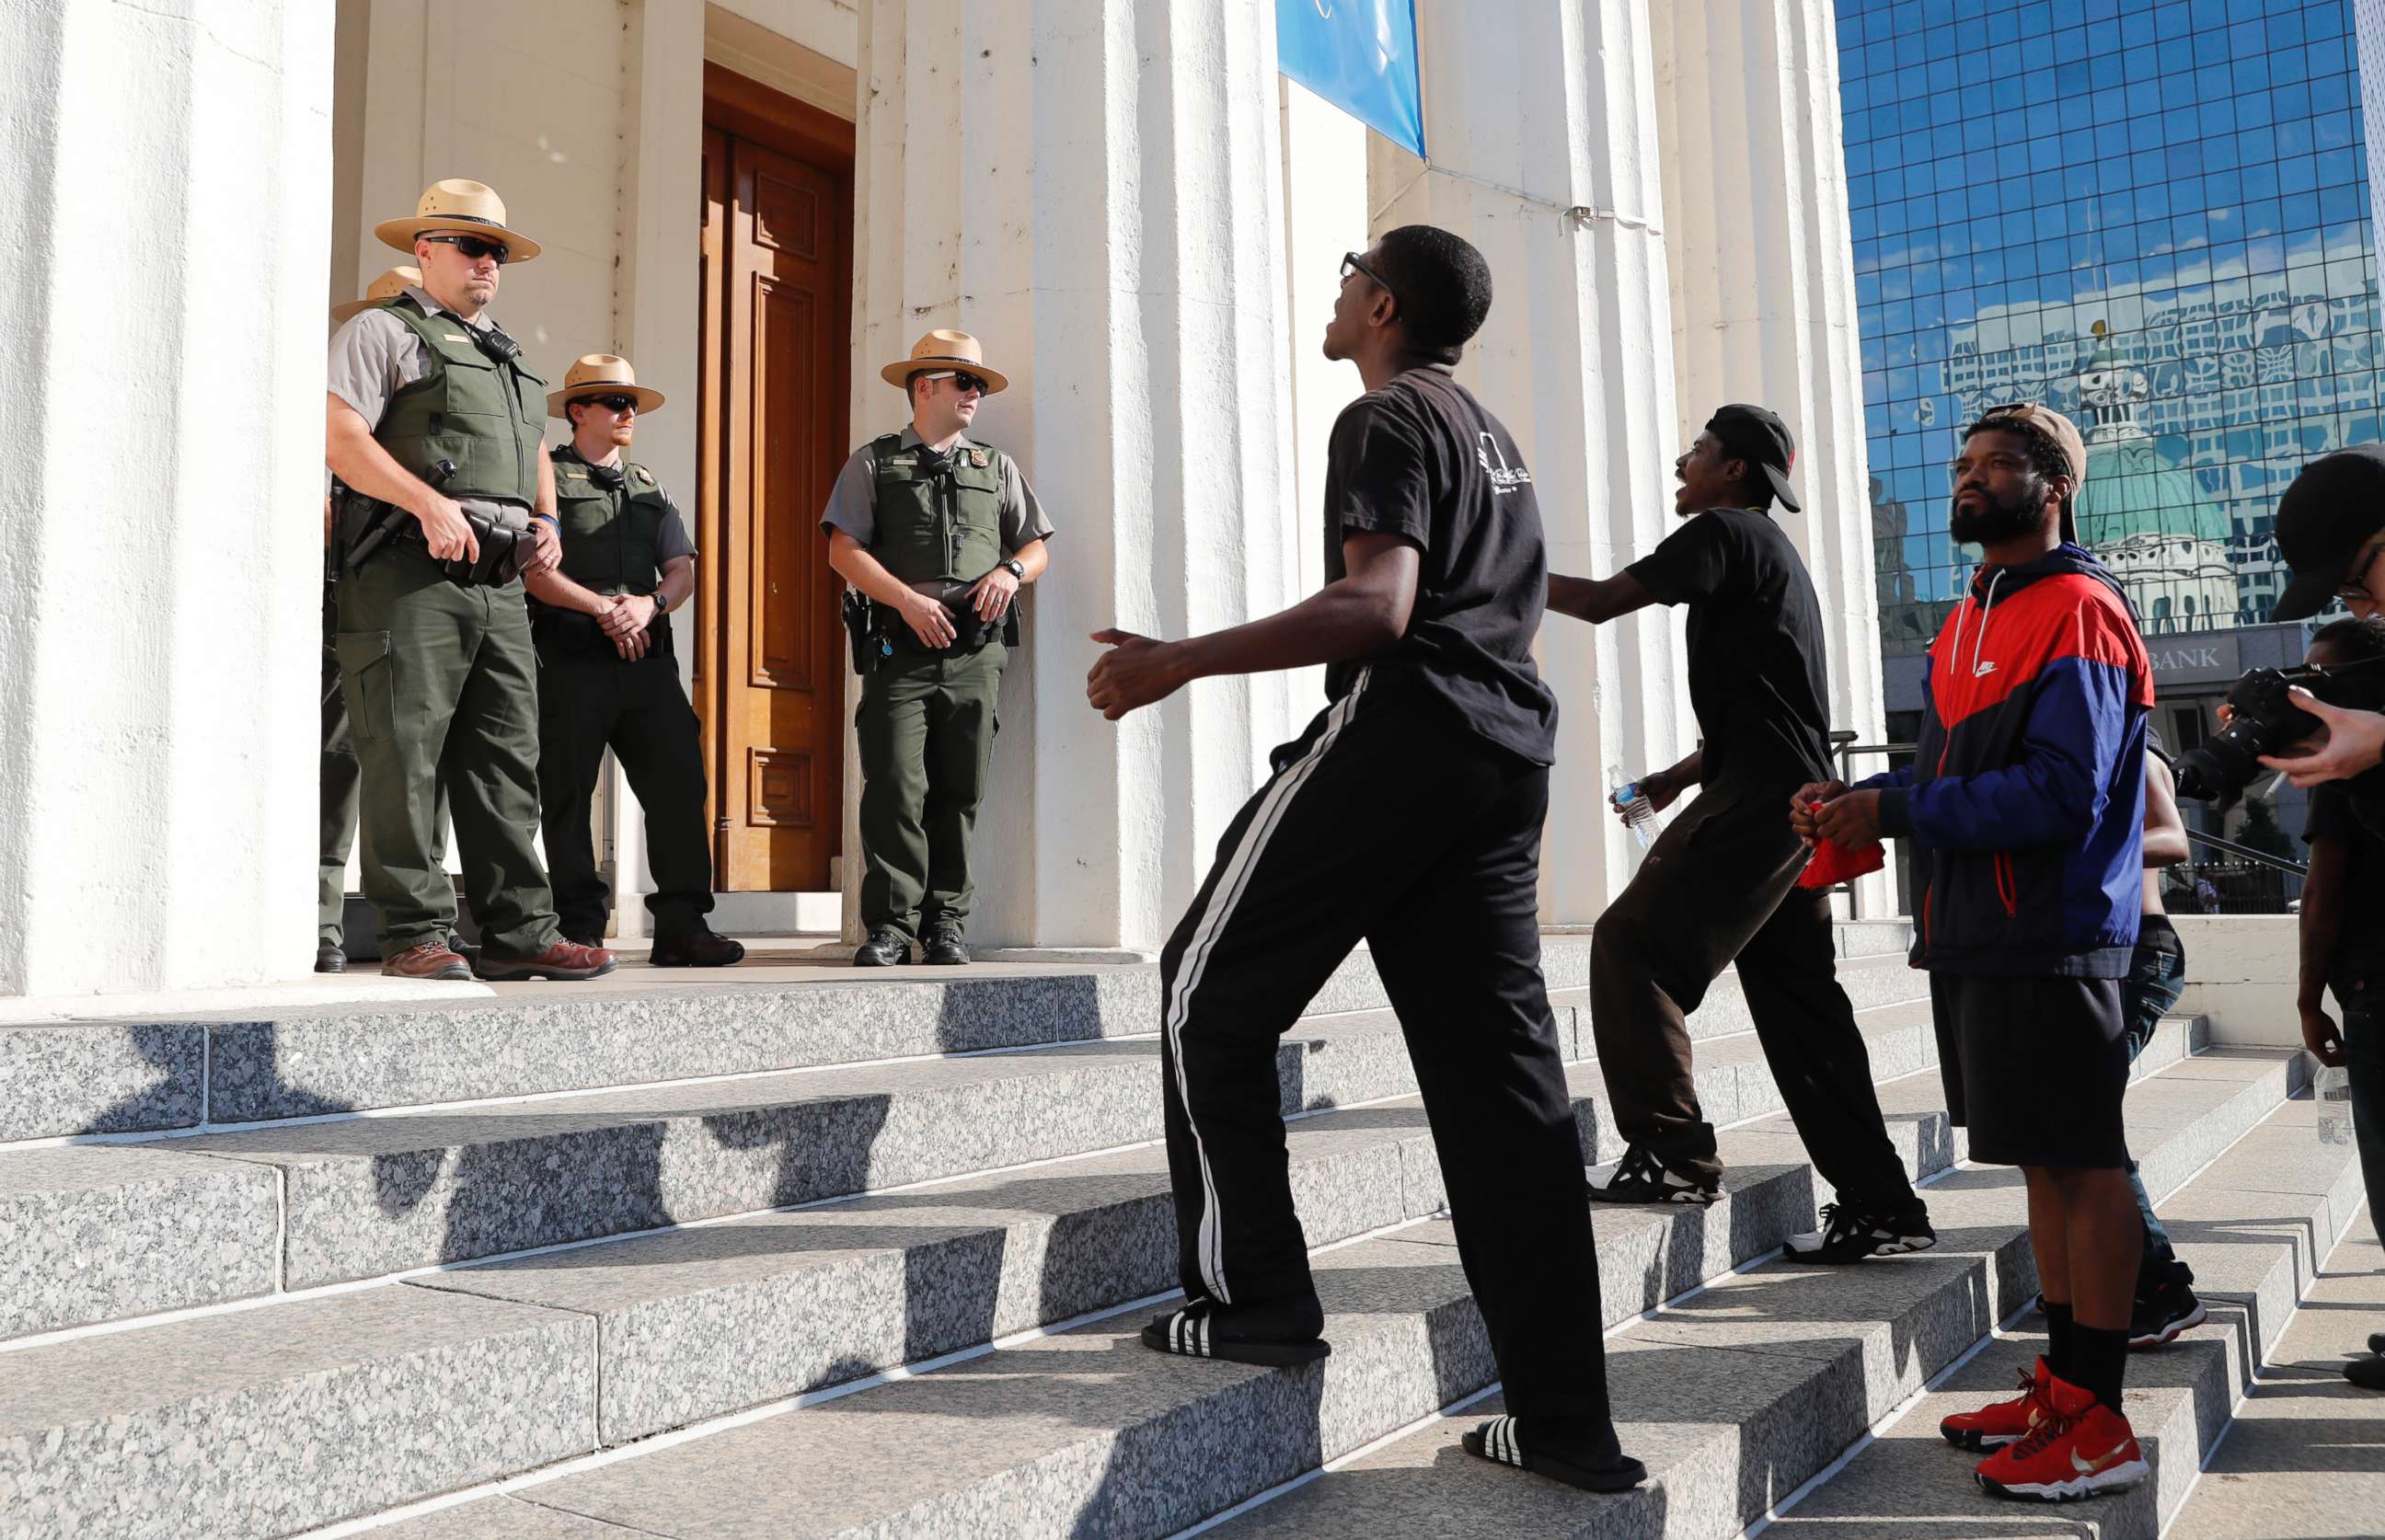 PHOTO: Protesters yell at law enforcement officers on the steps of the Old Courthouse following a verdict in the trial of former St. Louis police officer Jason Stockley in St. Louis on, Sept. 15, 2017.